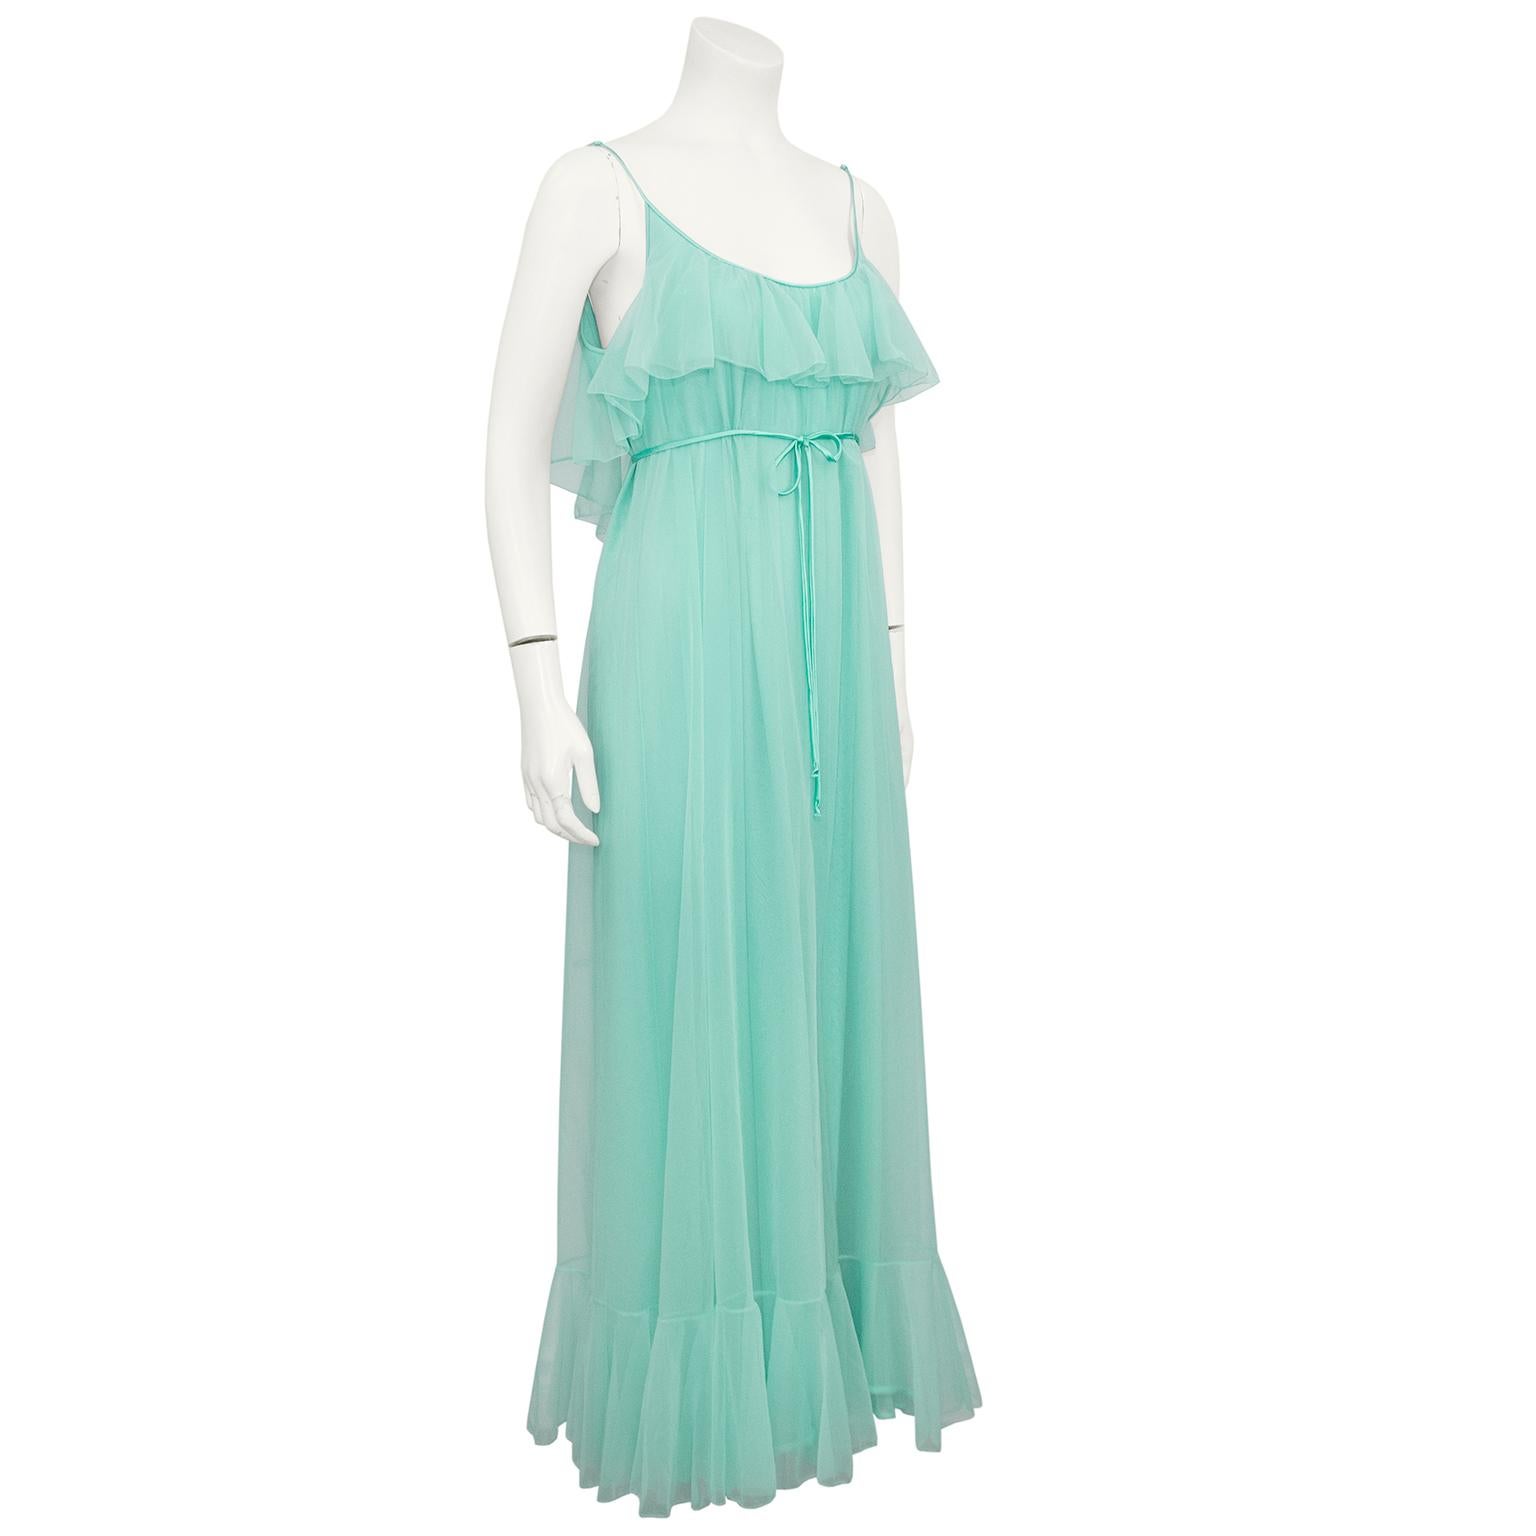 Sea foam green nightgown from the 1960s designed by Claire Sandra by Lucie Ann of Beverly Hills. Eva Gabor, the star of Green Acres a popular 1960’s TV show, was renowned for wearing these over the top concoctions as the farmers wife.  Thin